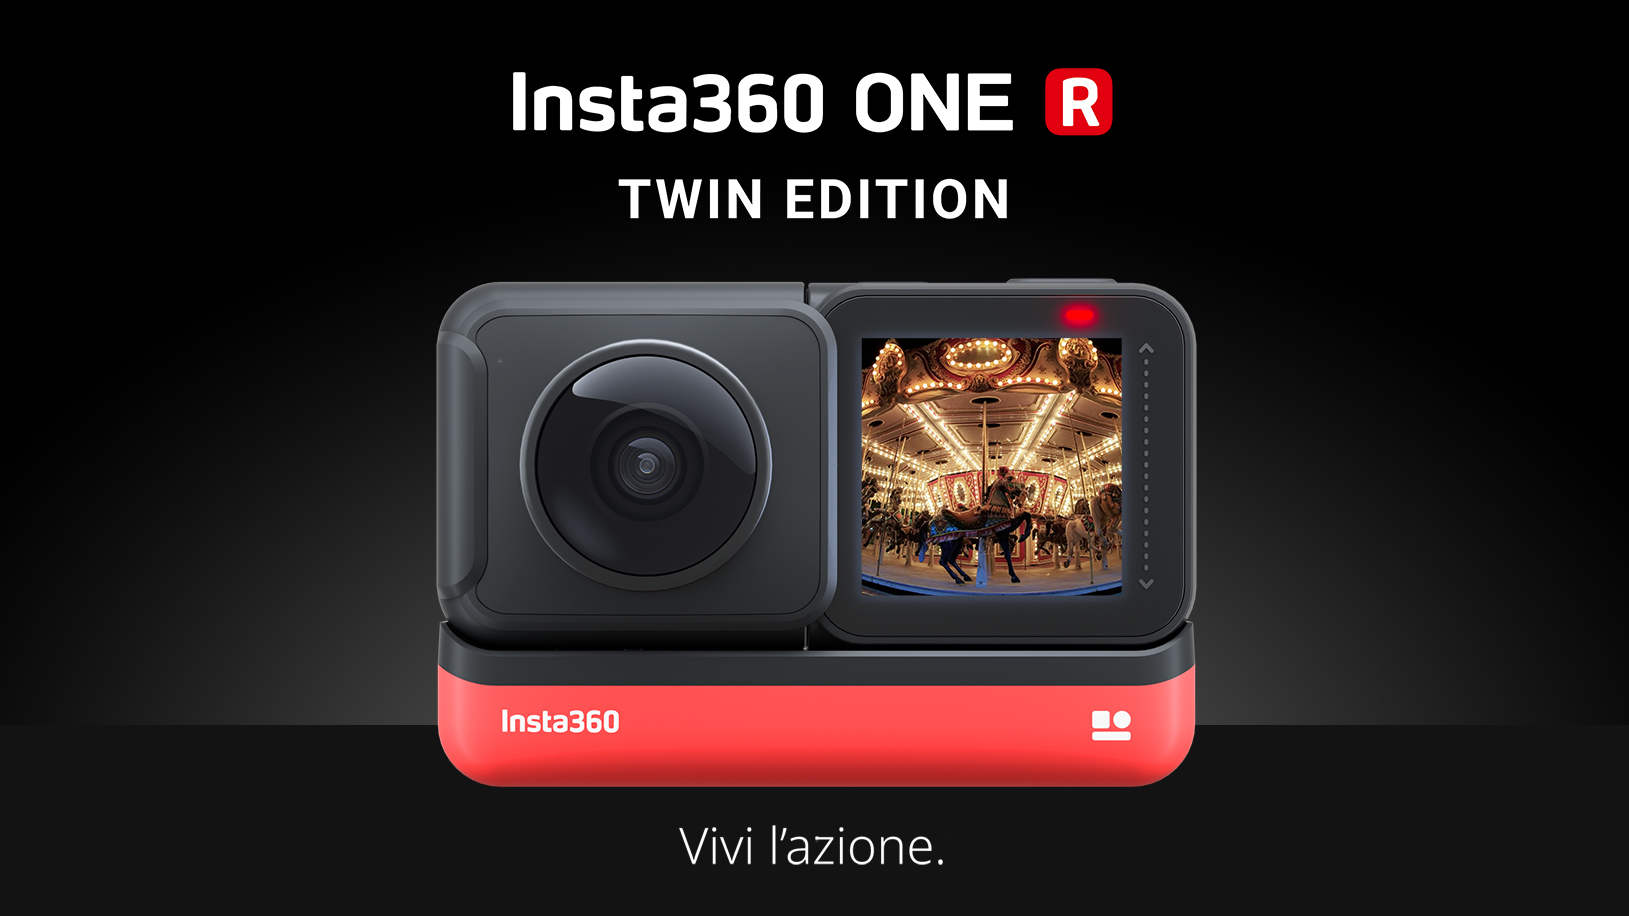 Insta360 action cam ONE R TWIN EDITION